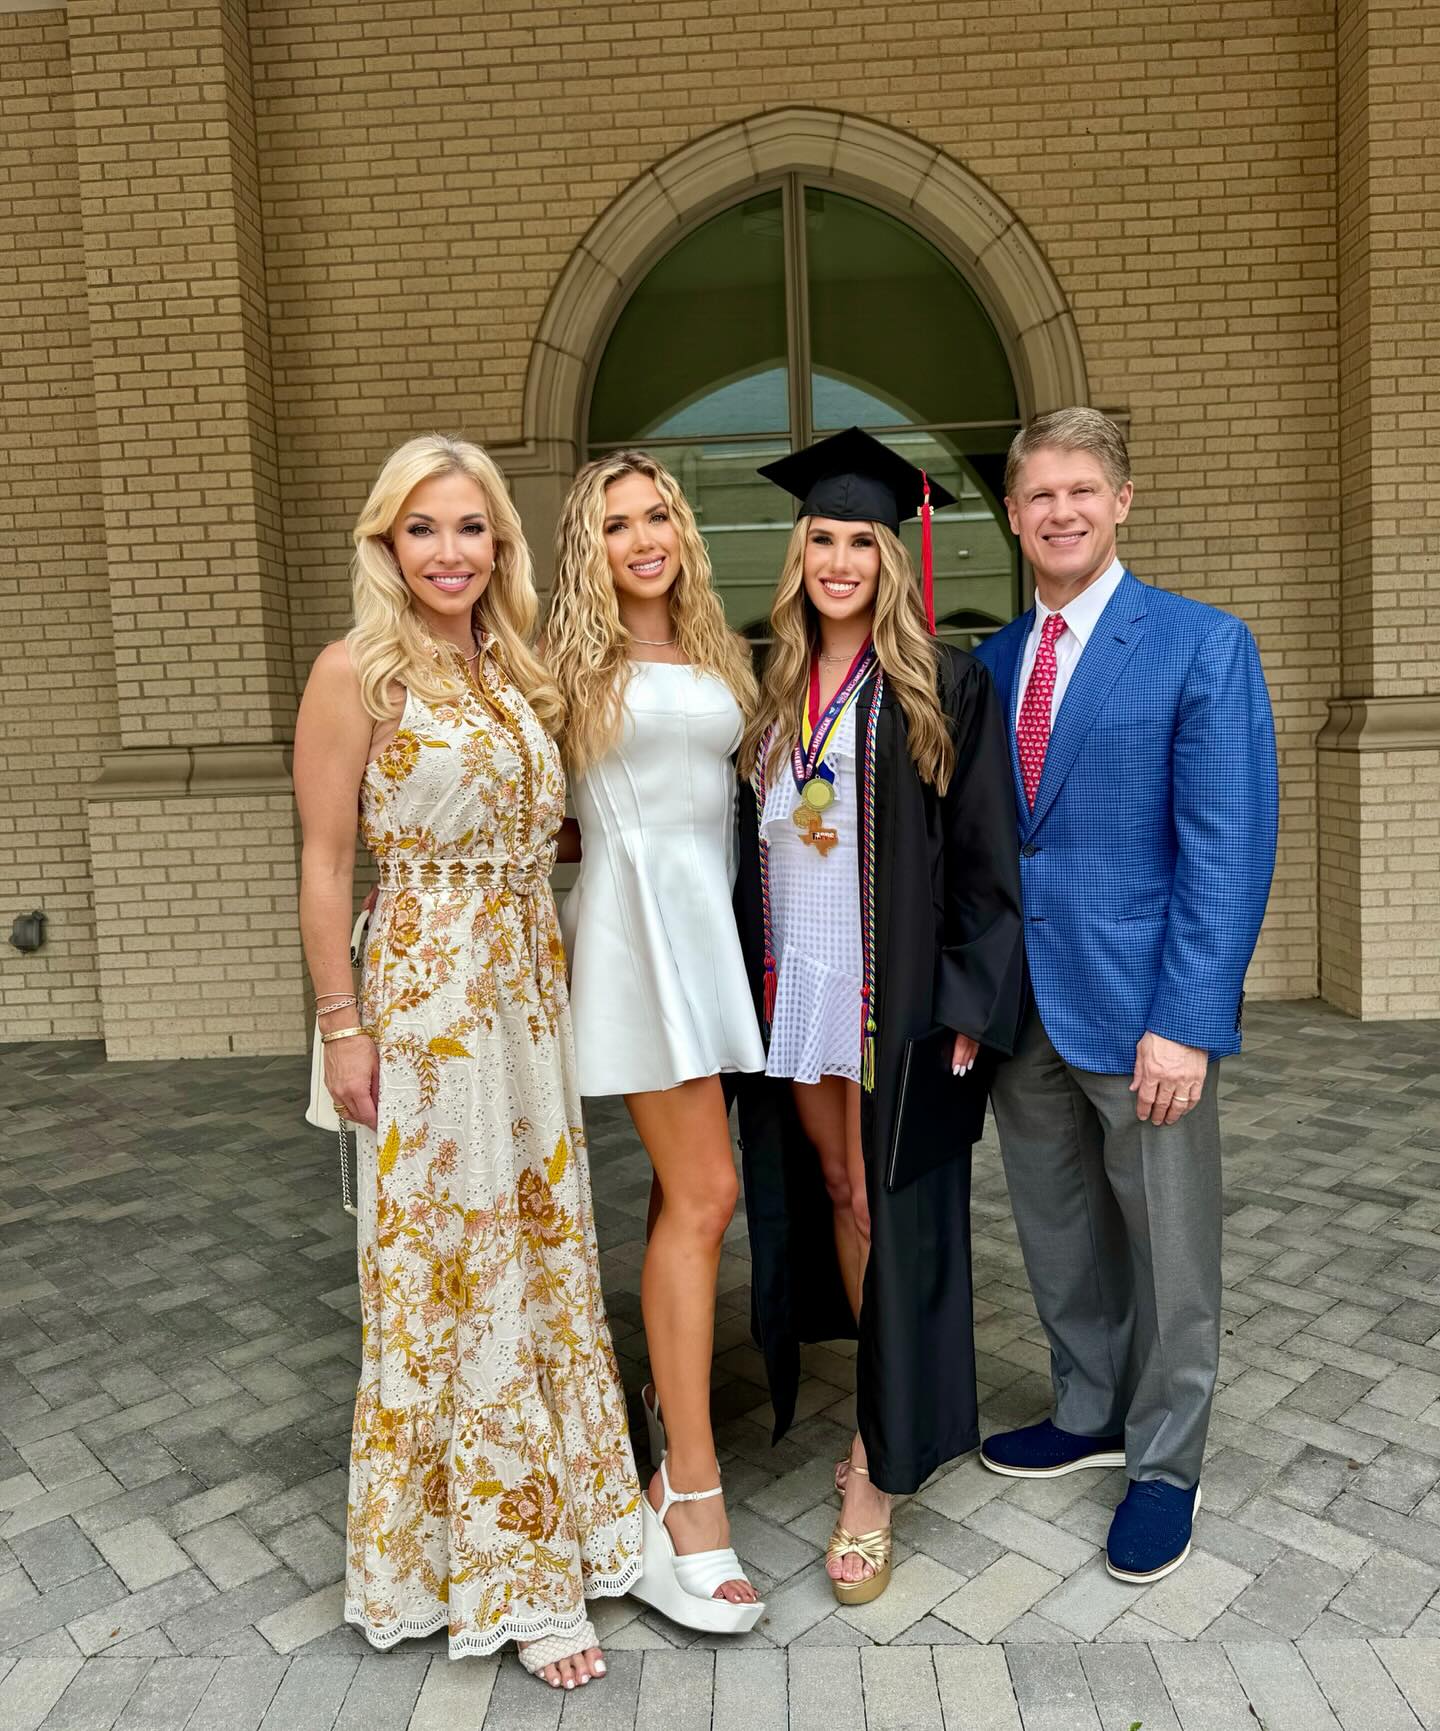 Ava Hunt posing for graduation photos with her family